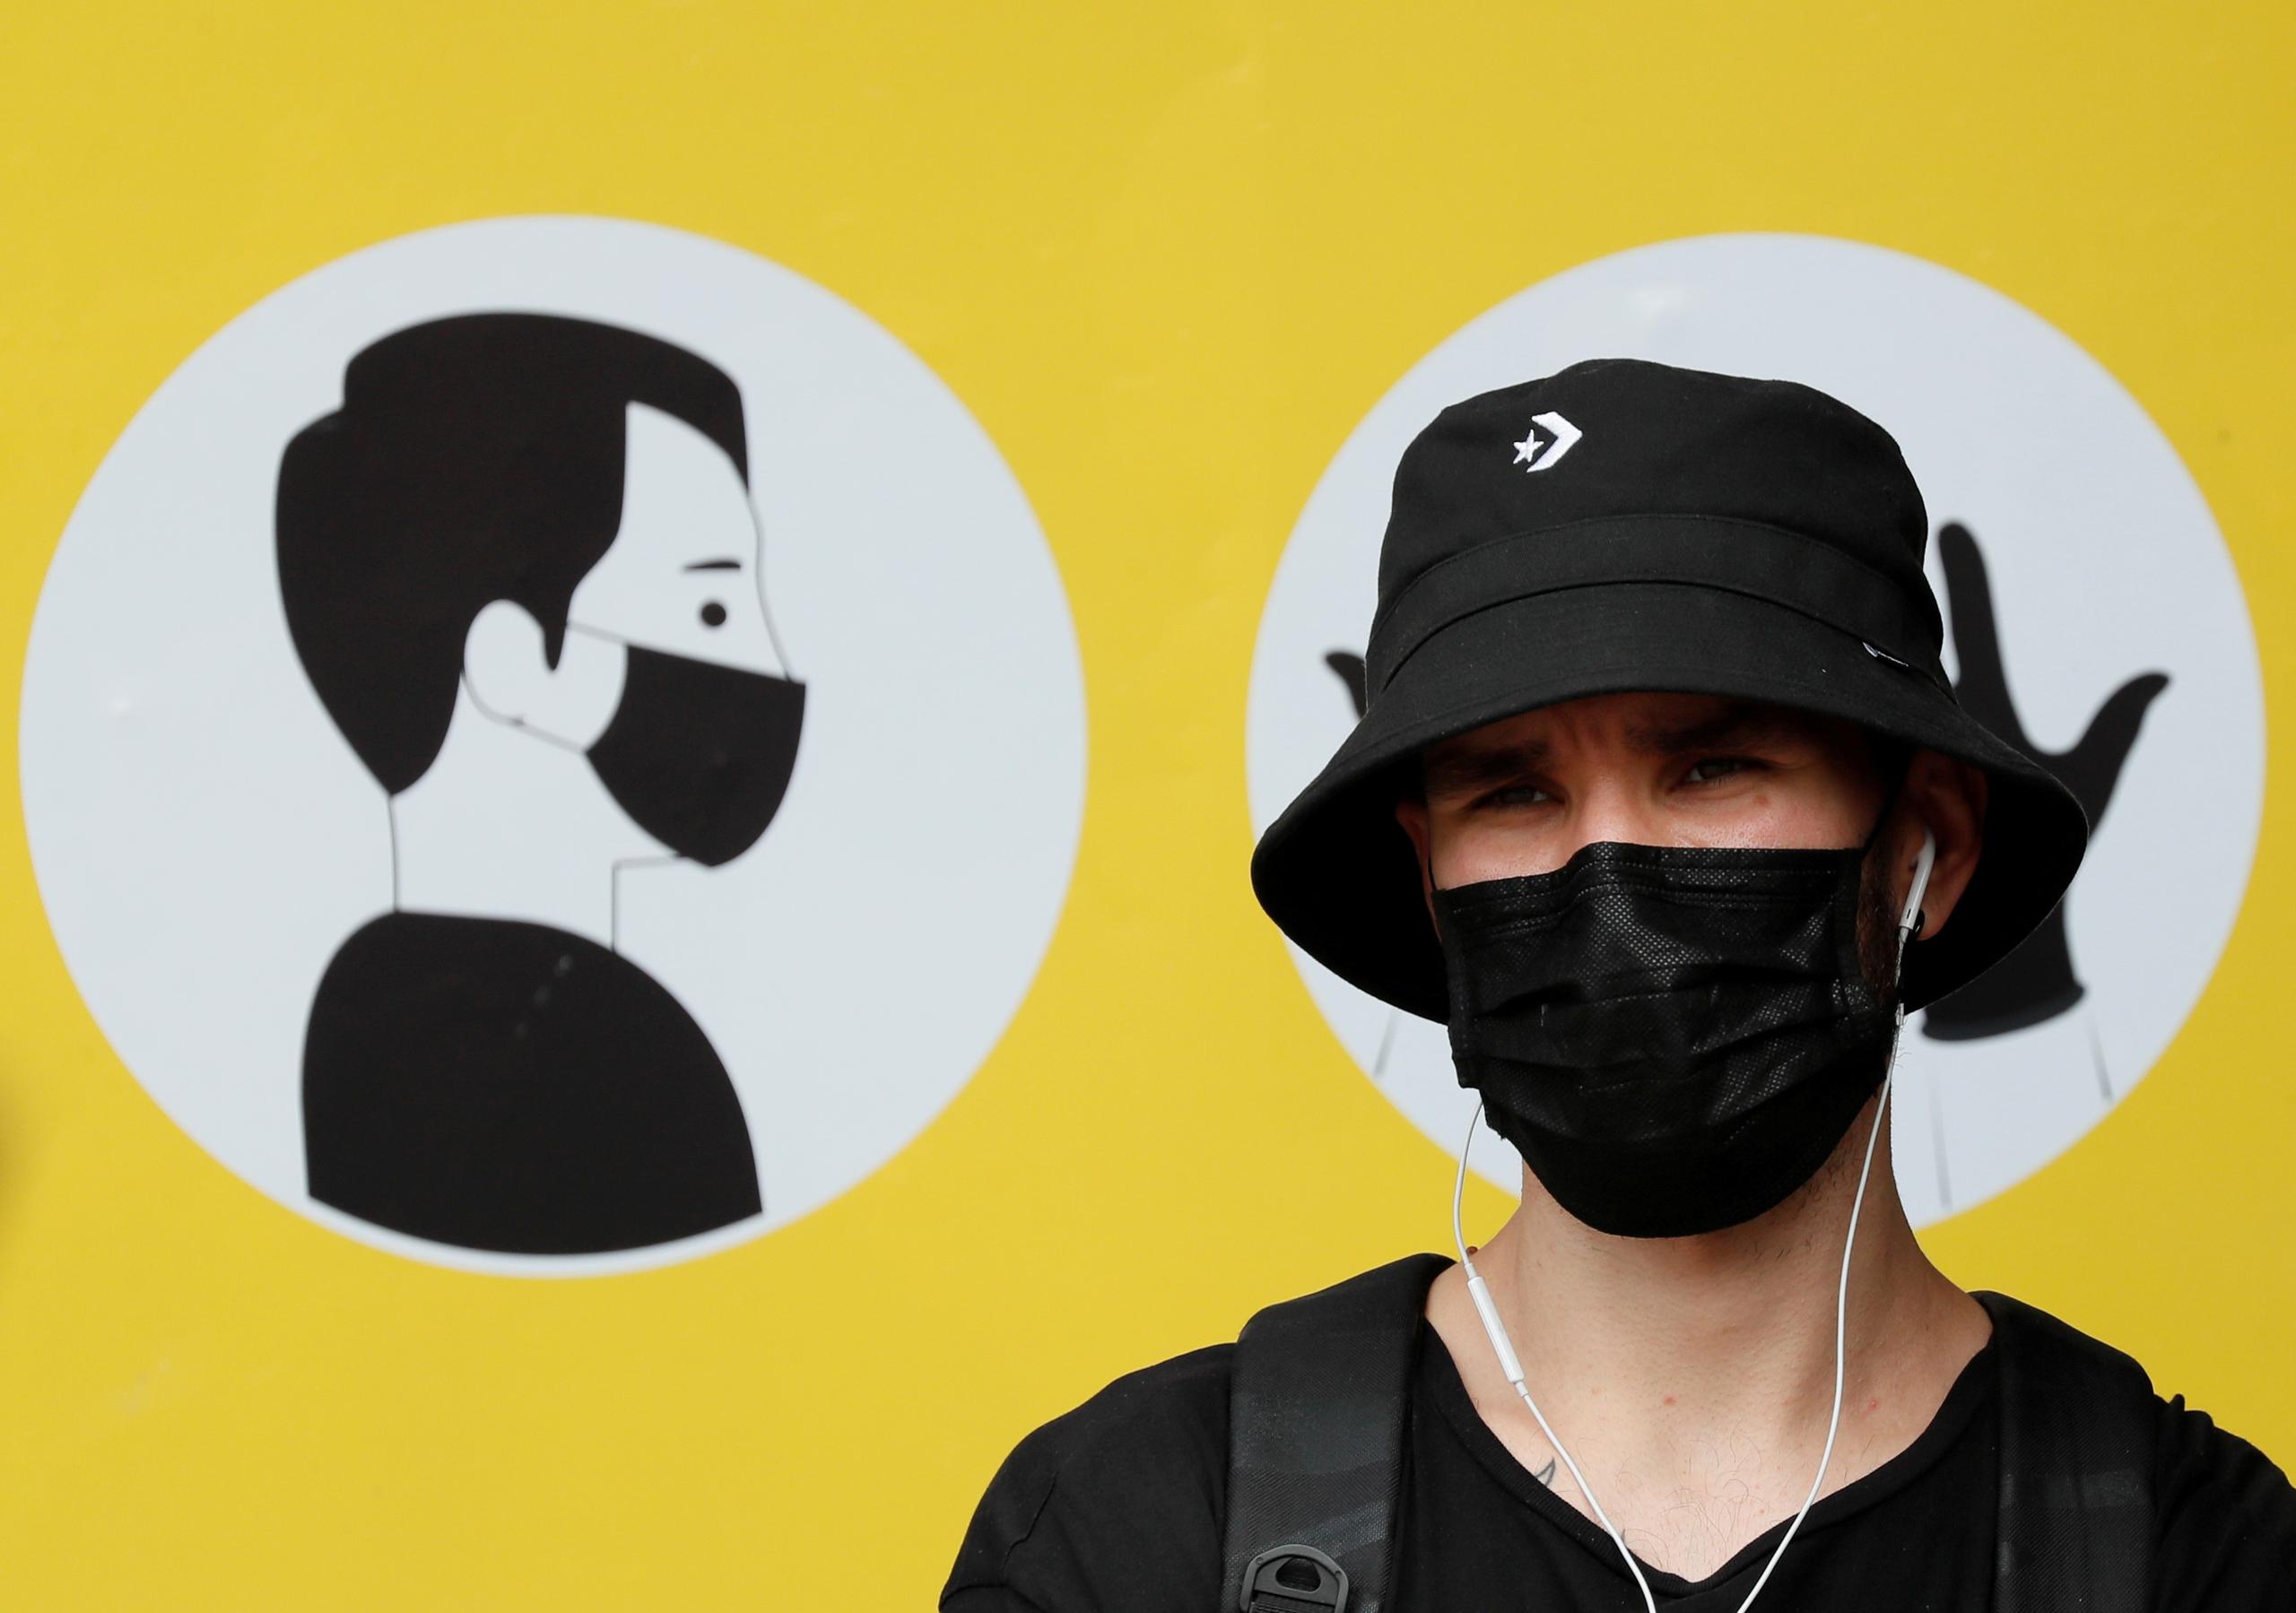 A man wearing a protective face mask amid the outbreak of the coronavirus disease (COVID-19) stands in front of a social poster in central Kyiv, Ukraine July 30, 2020. REUTERS/Gleb Garanich/File Photo